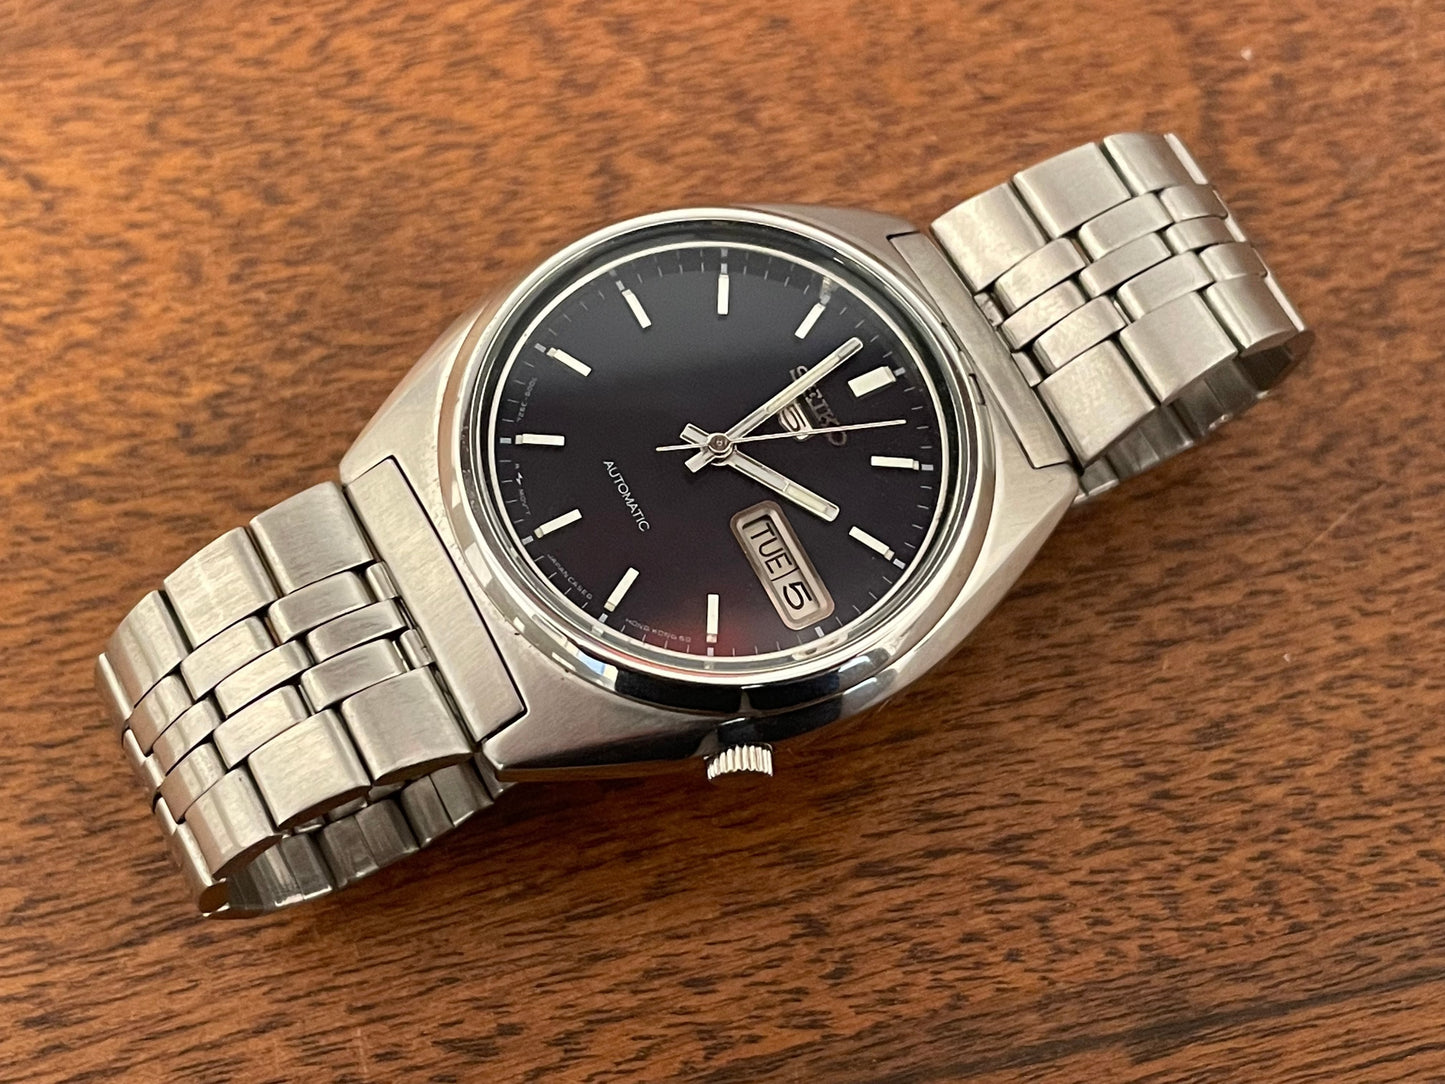 (1985) Seiko 5 Automatic 7009-8331 with dark blue dial (serviced)